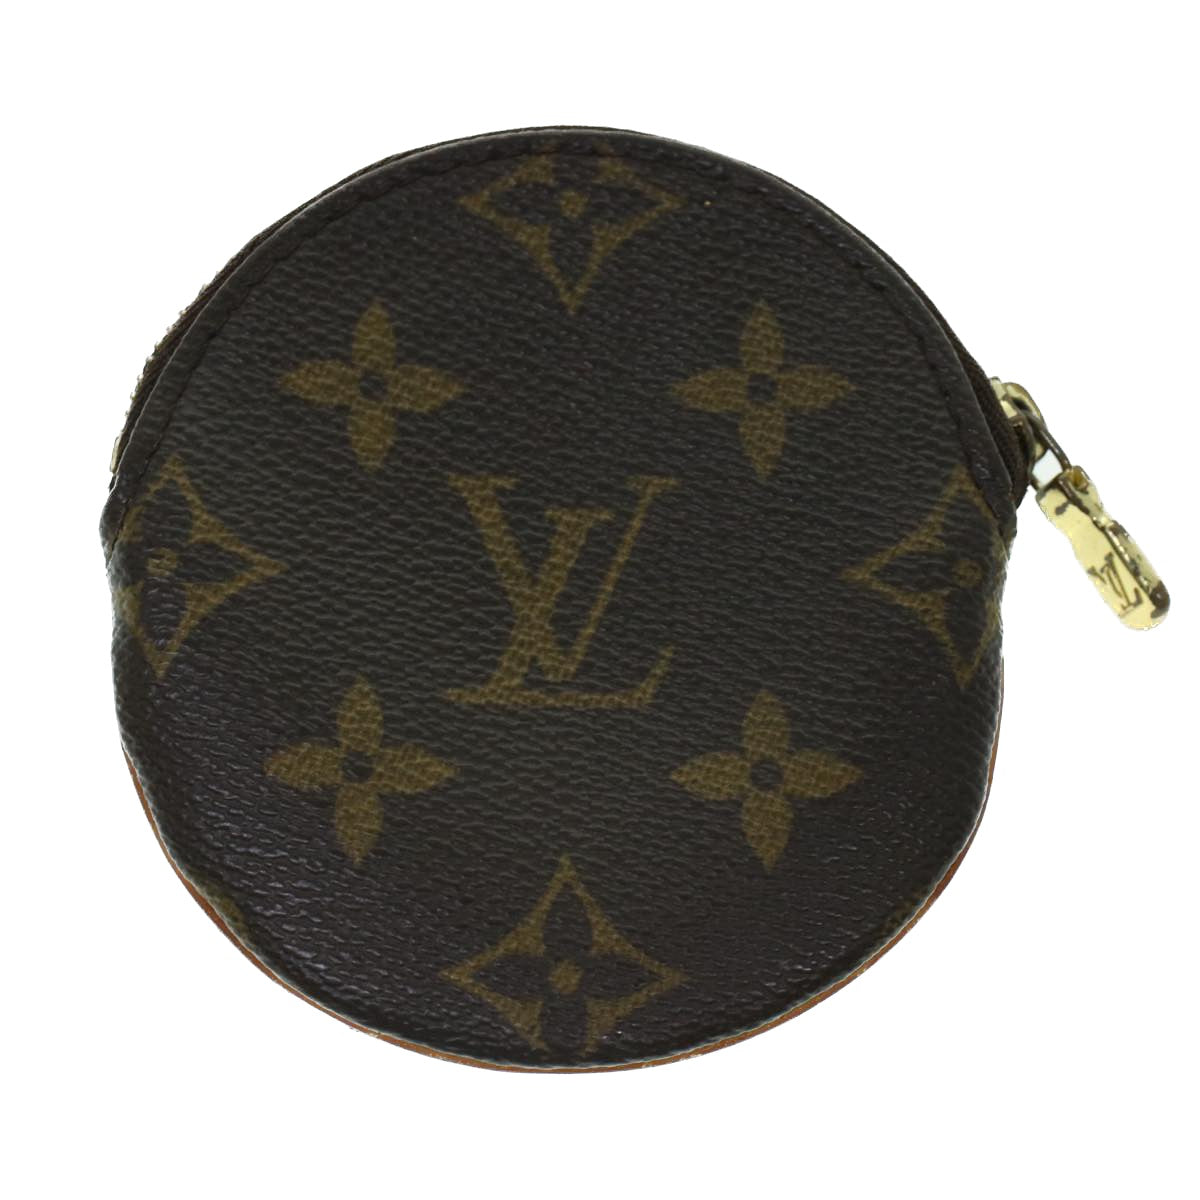 LOUIS VUITTON ROUND COIN PURSE | DISCONTINUED SLG | FIRST IMPRESSIONS, HOW  I GOT IT & WHAT FITS - YouTube